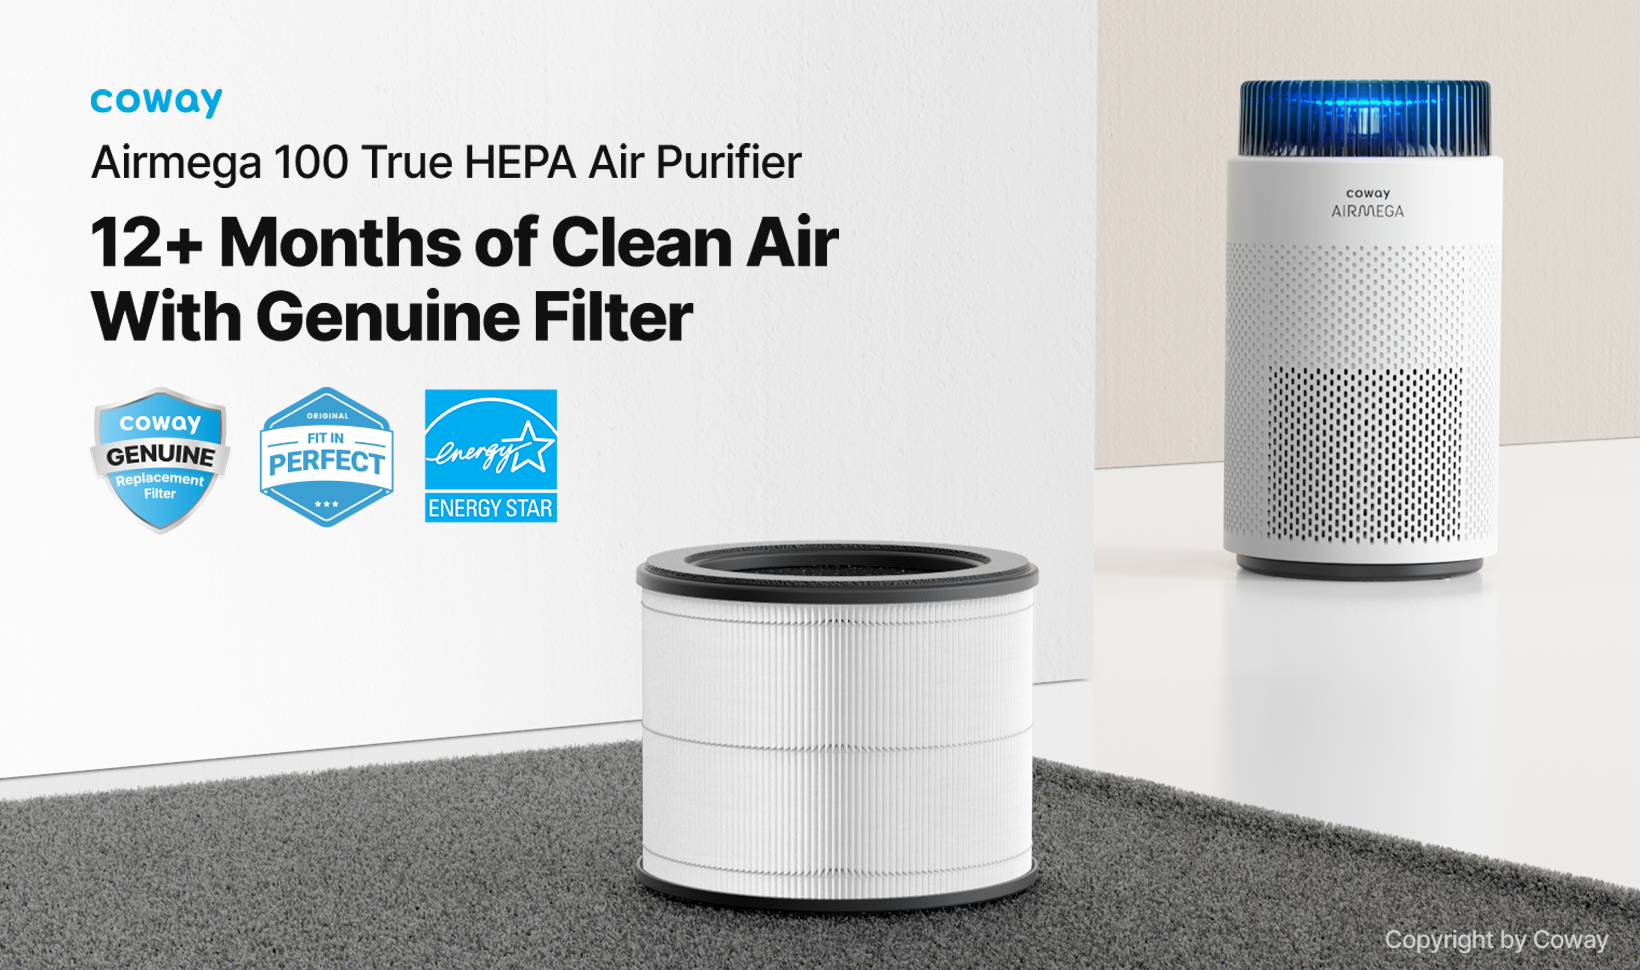 Airmega 100 replacement filter lasts 12+ months